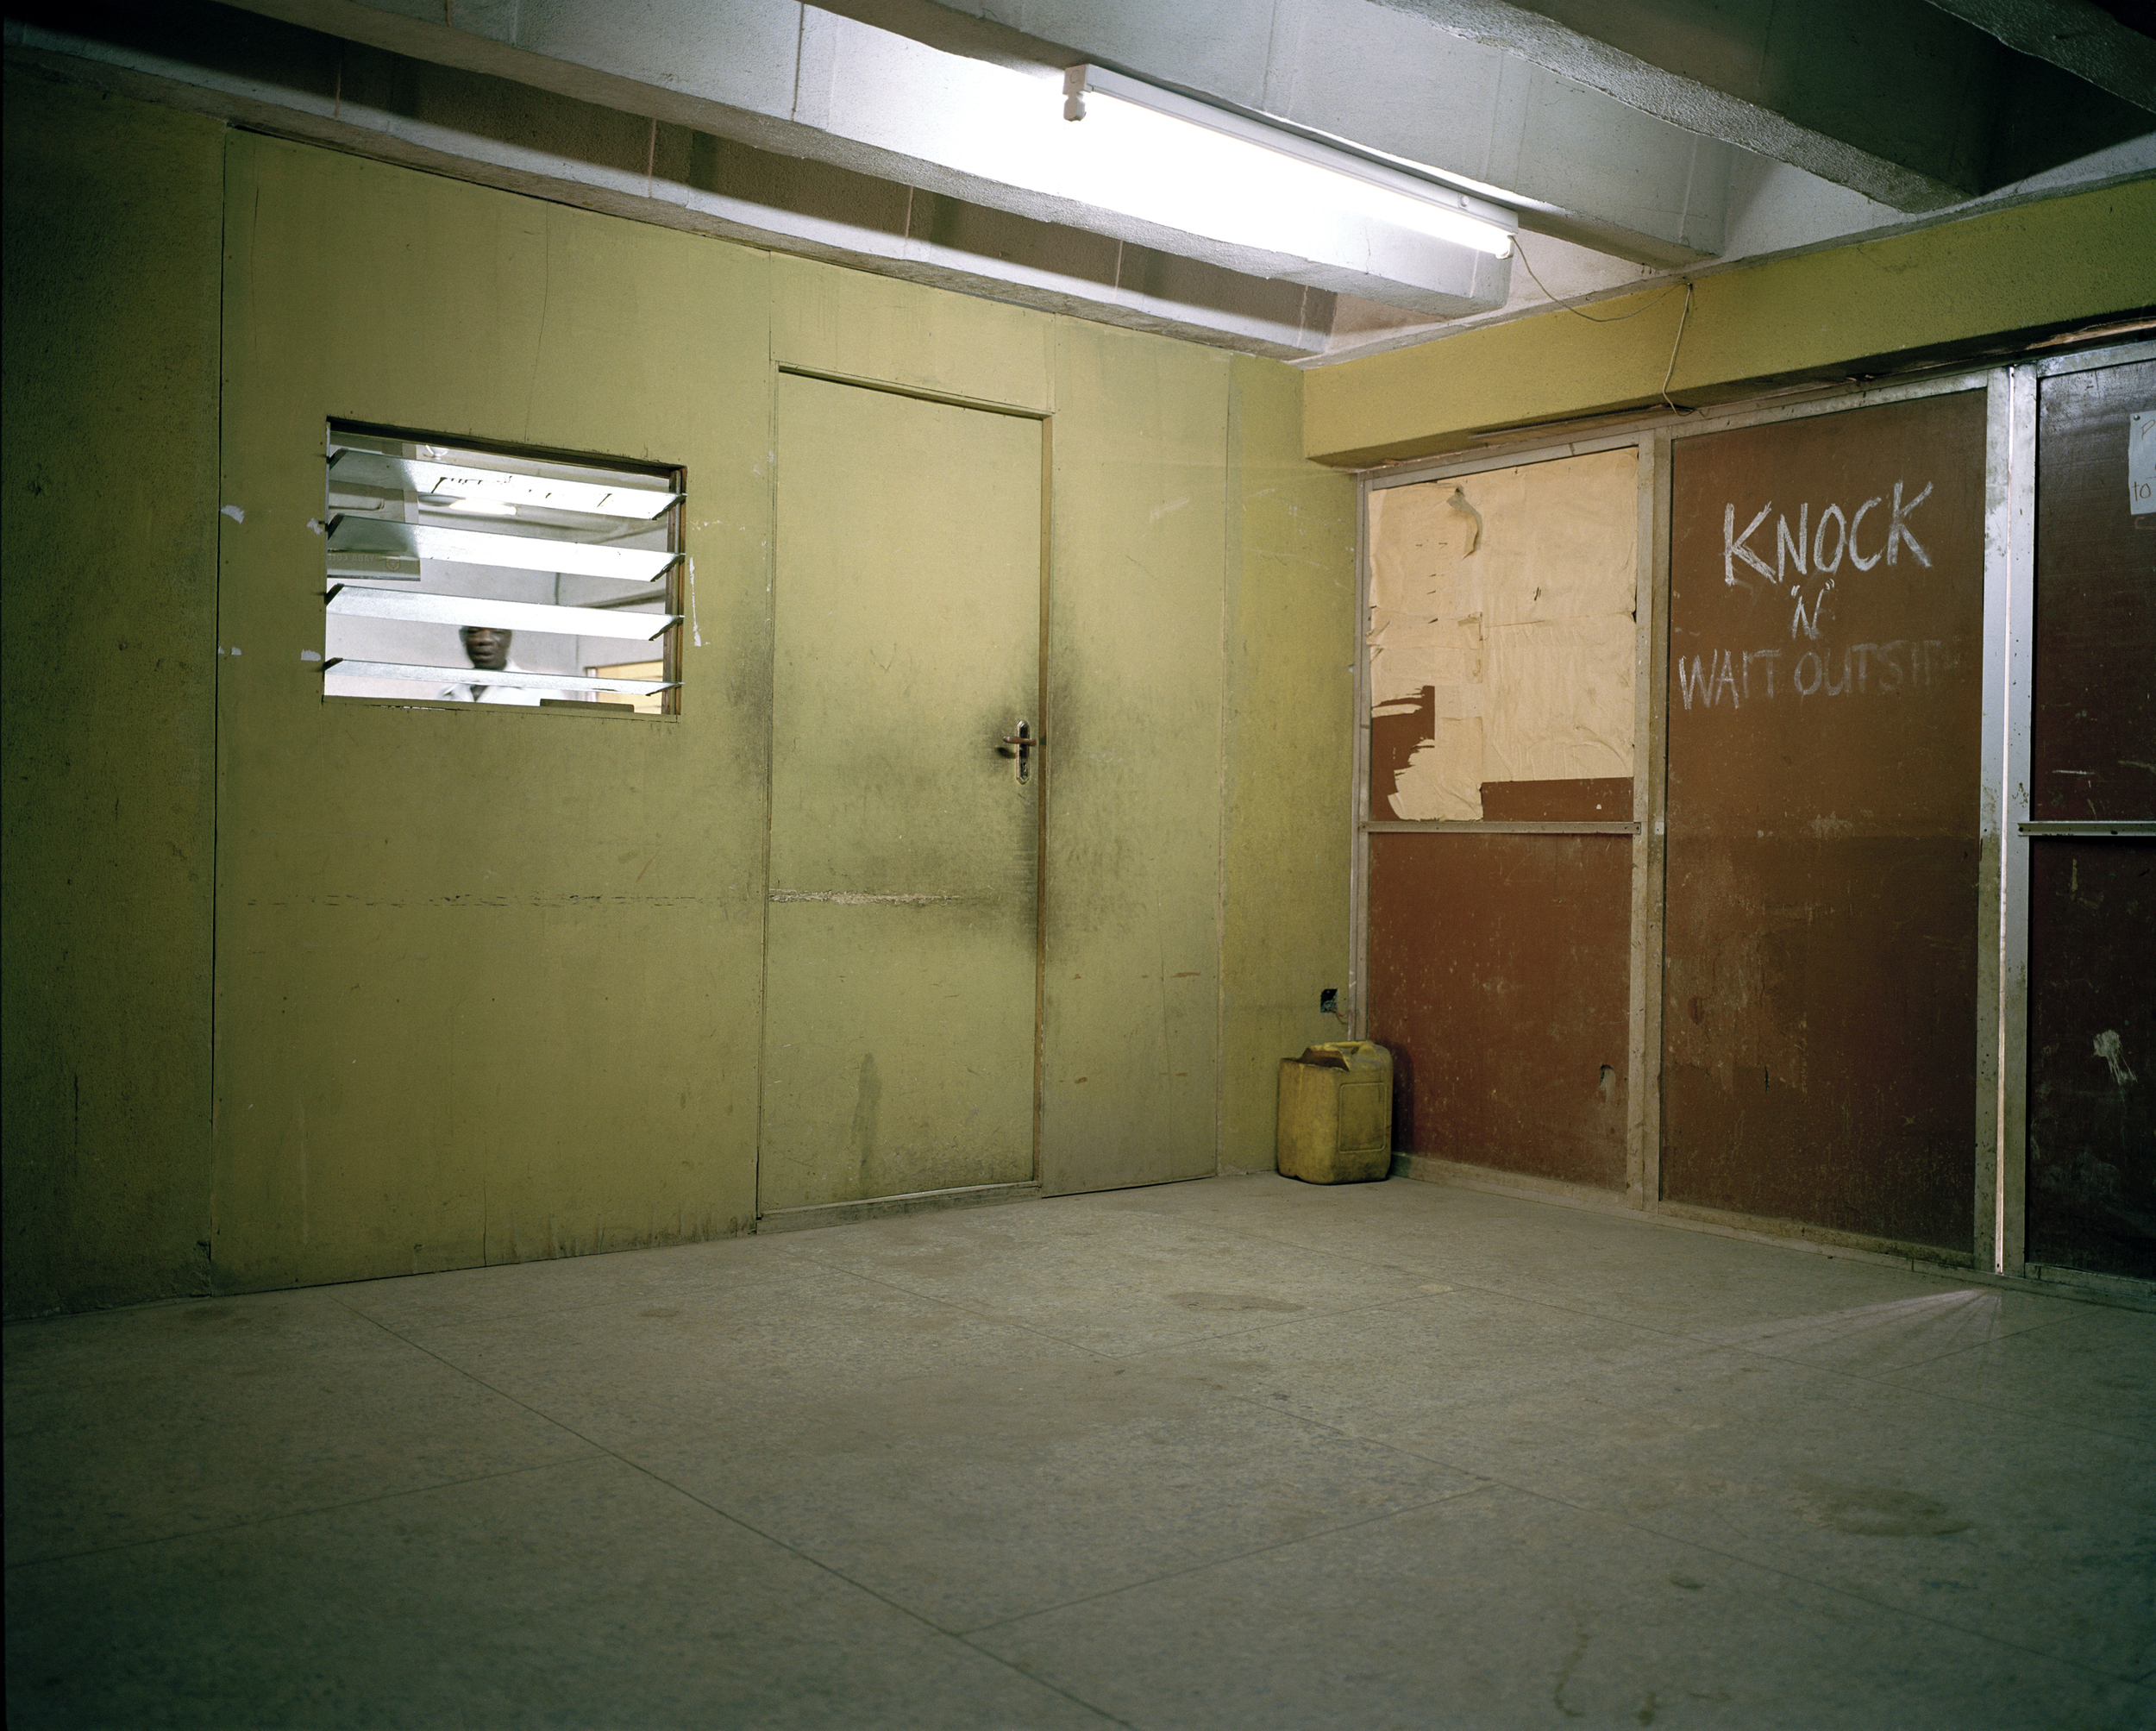 Knock - Invisible Cities 2006.jpg